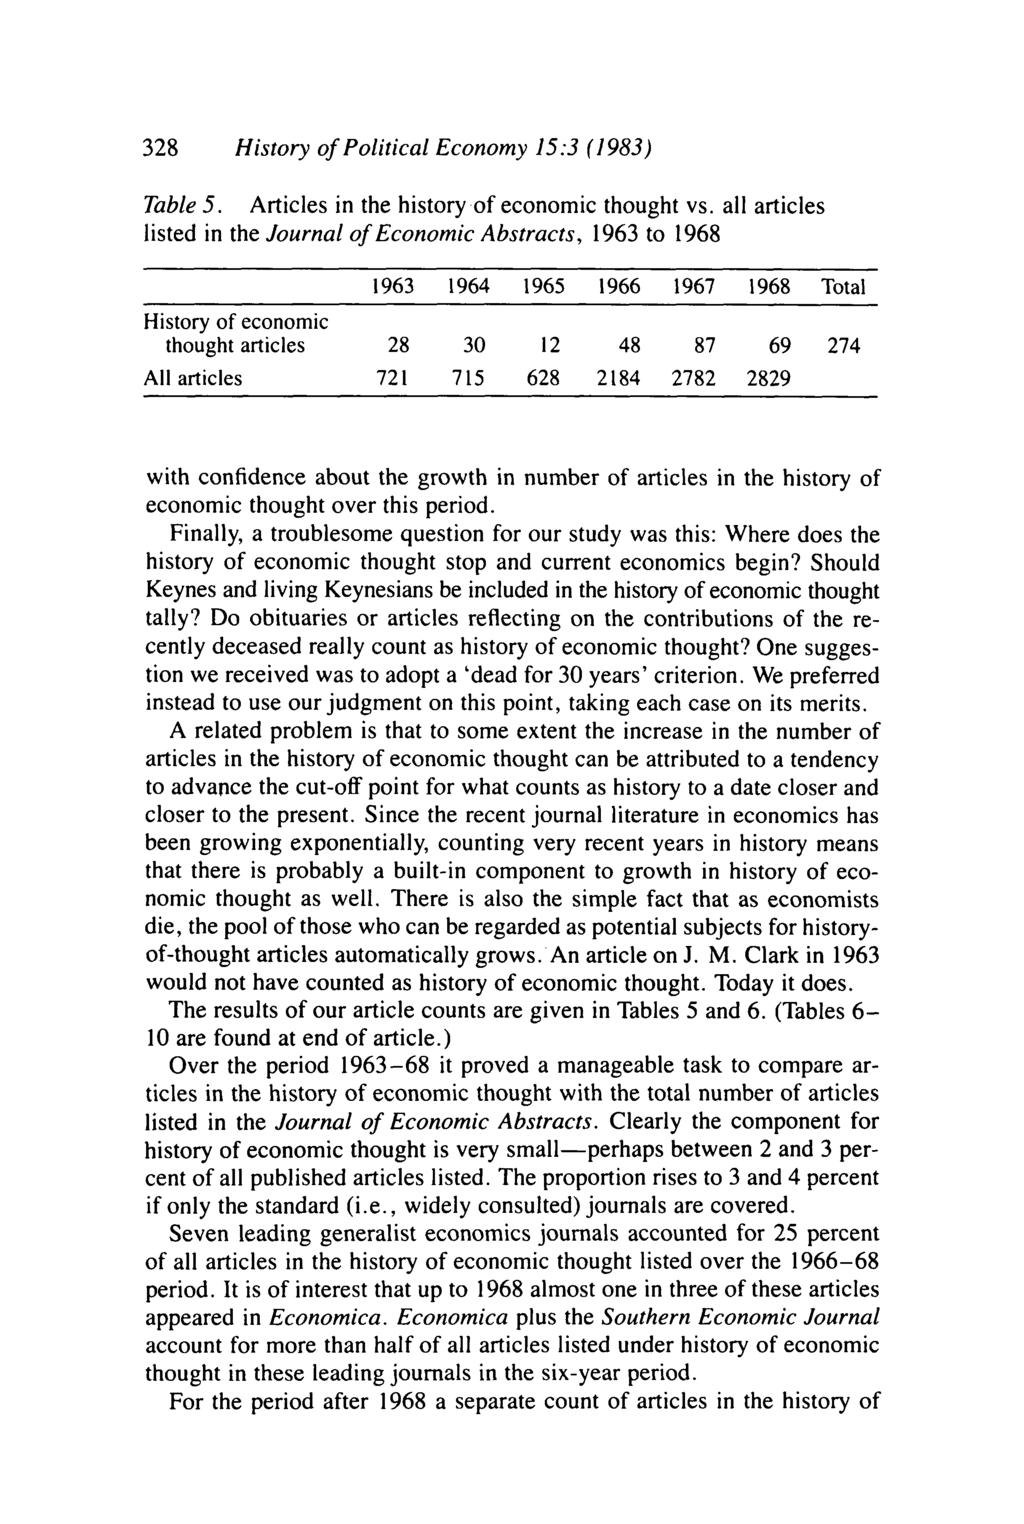 38 History of Political Econoy 5:3 (983) Table 5. Articles in the history of econoic thought vs.